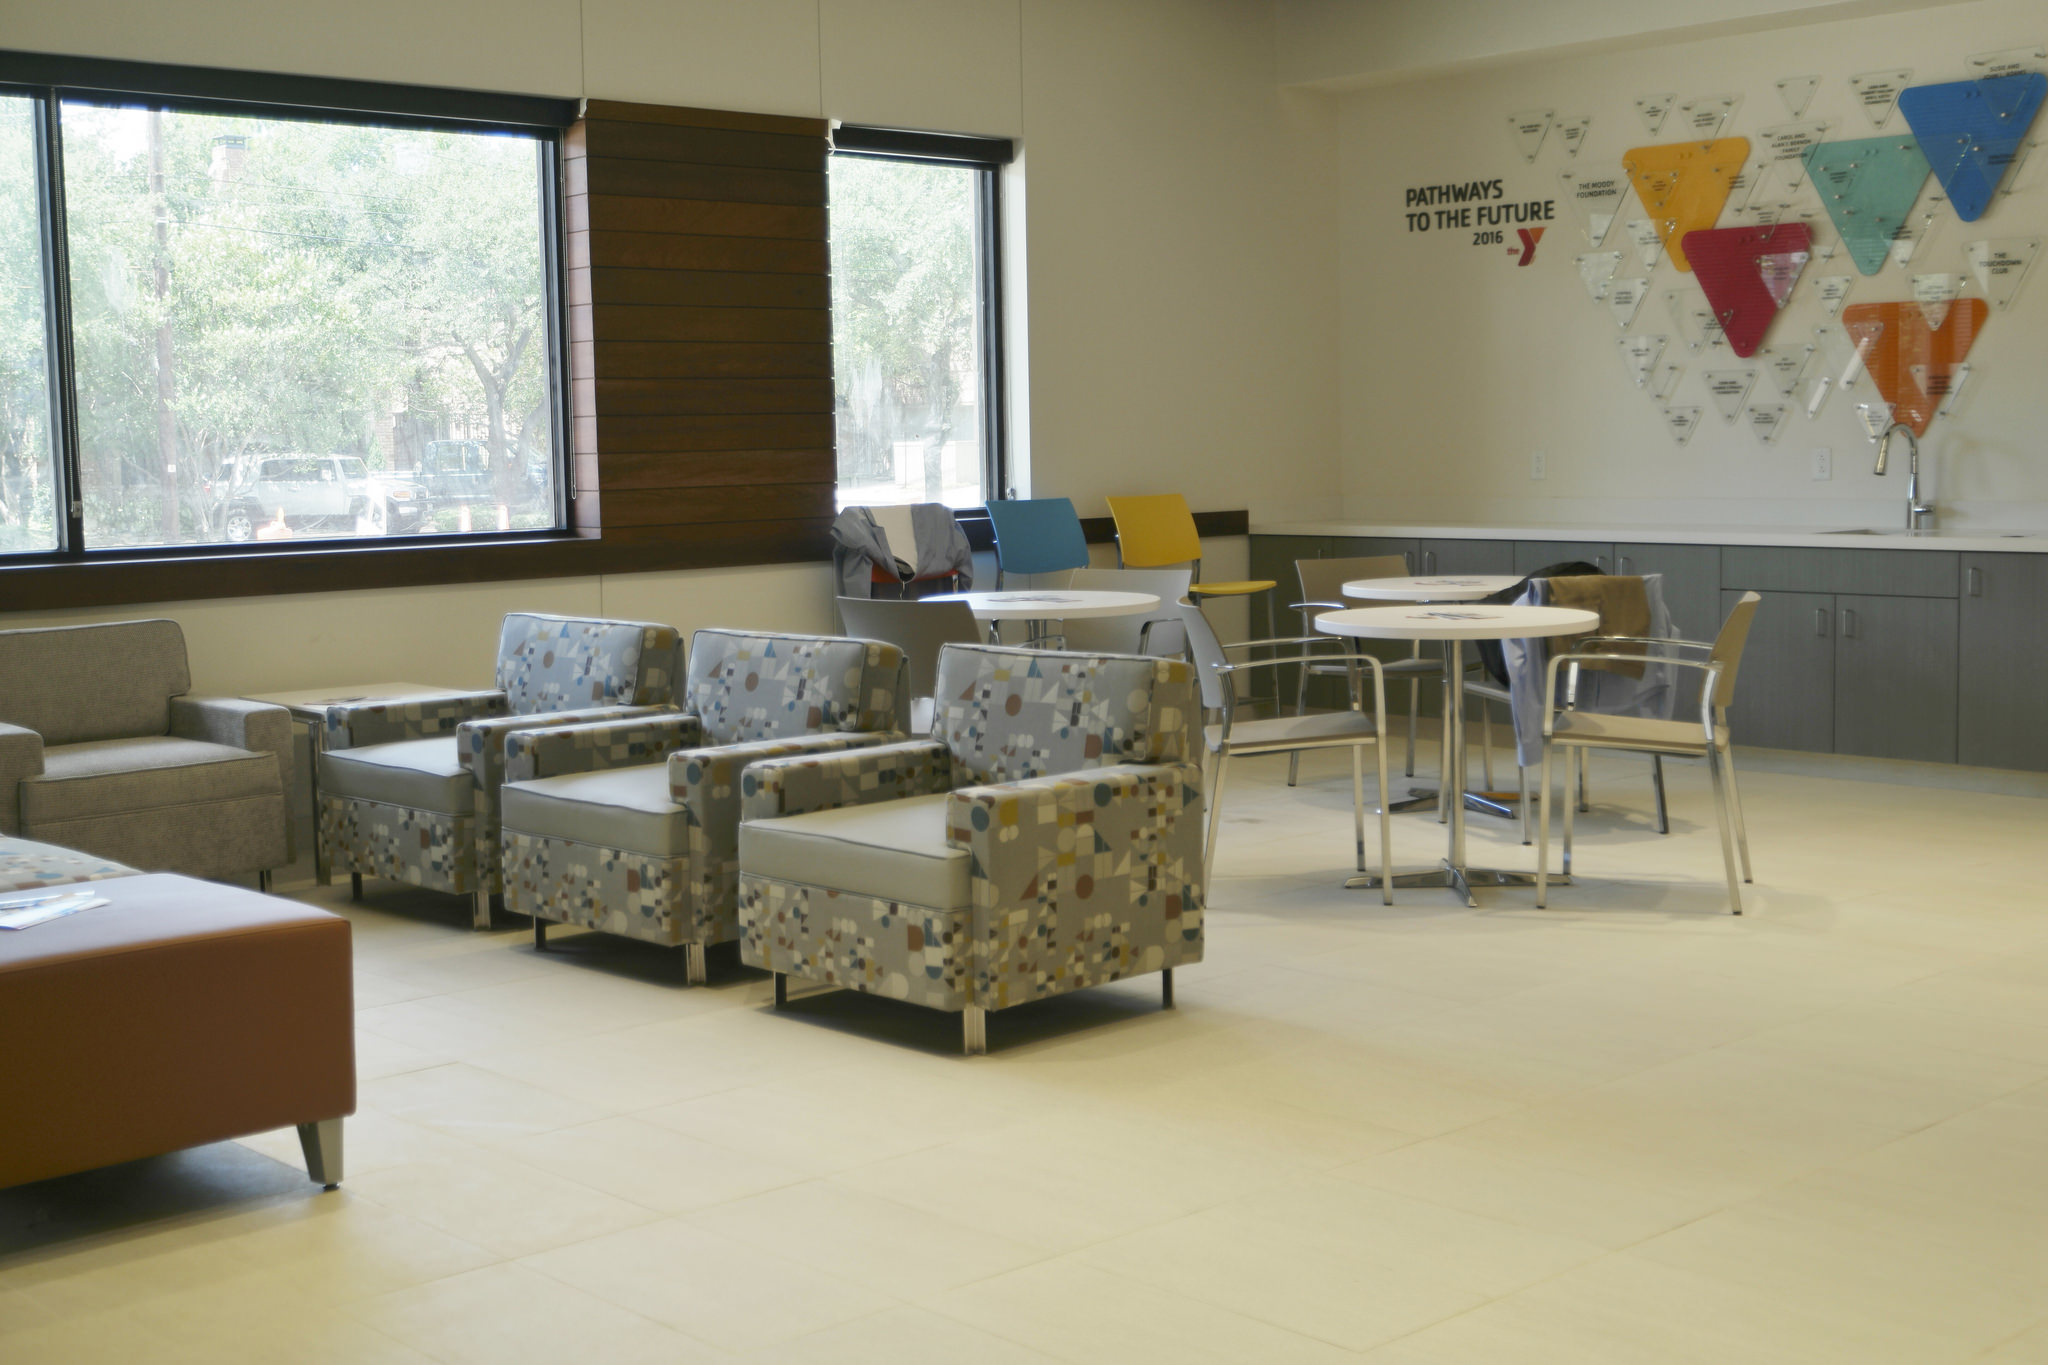 The new center, doubled in size, has community rooms ideal for gatherings.